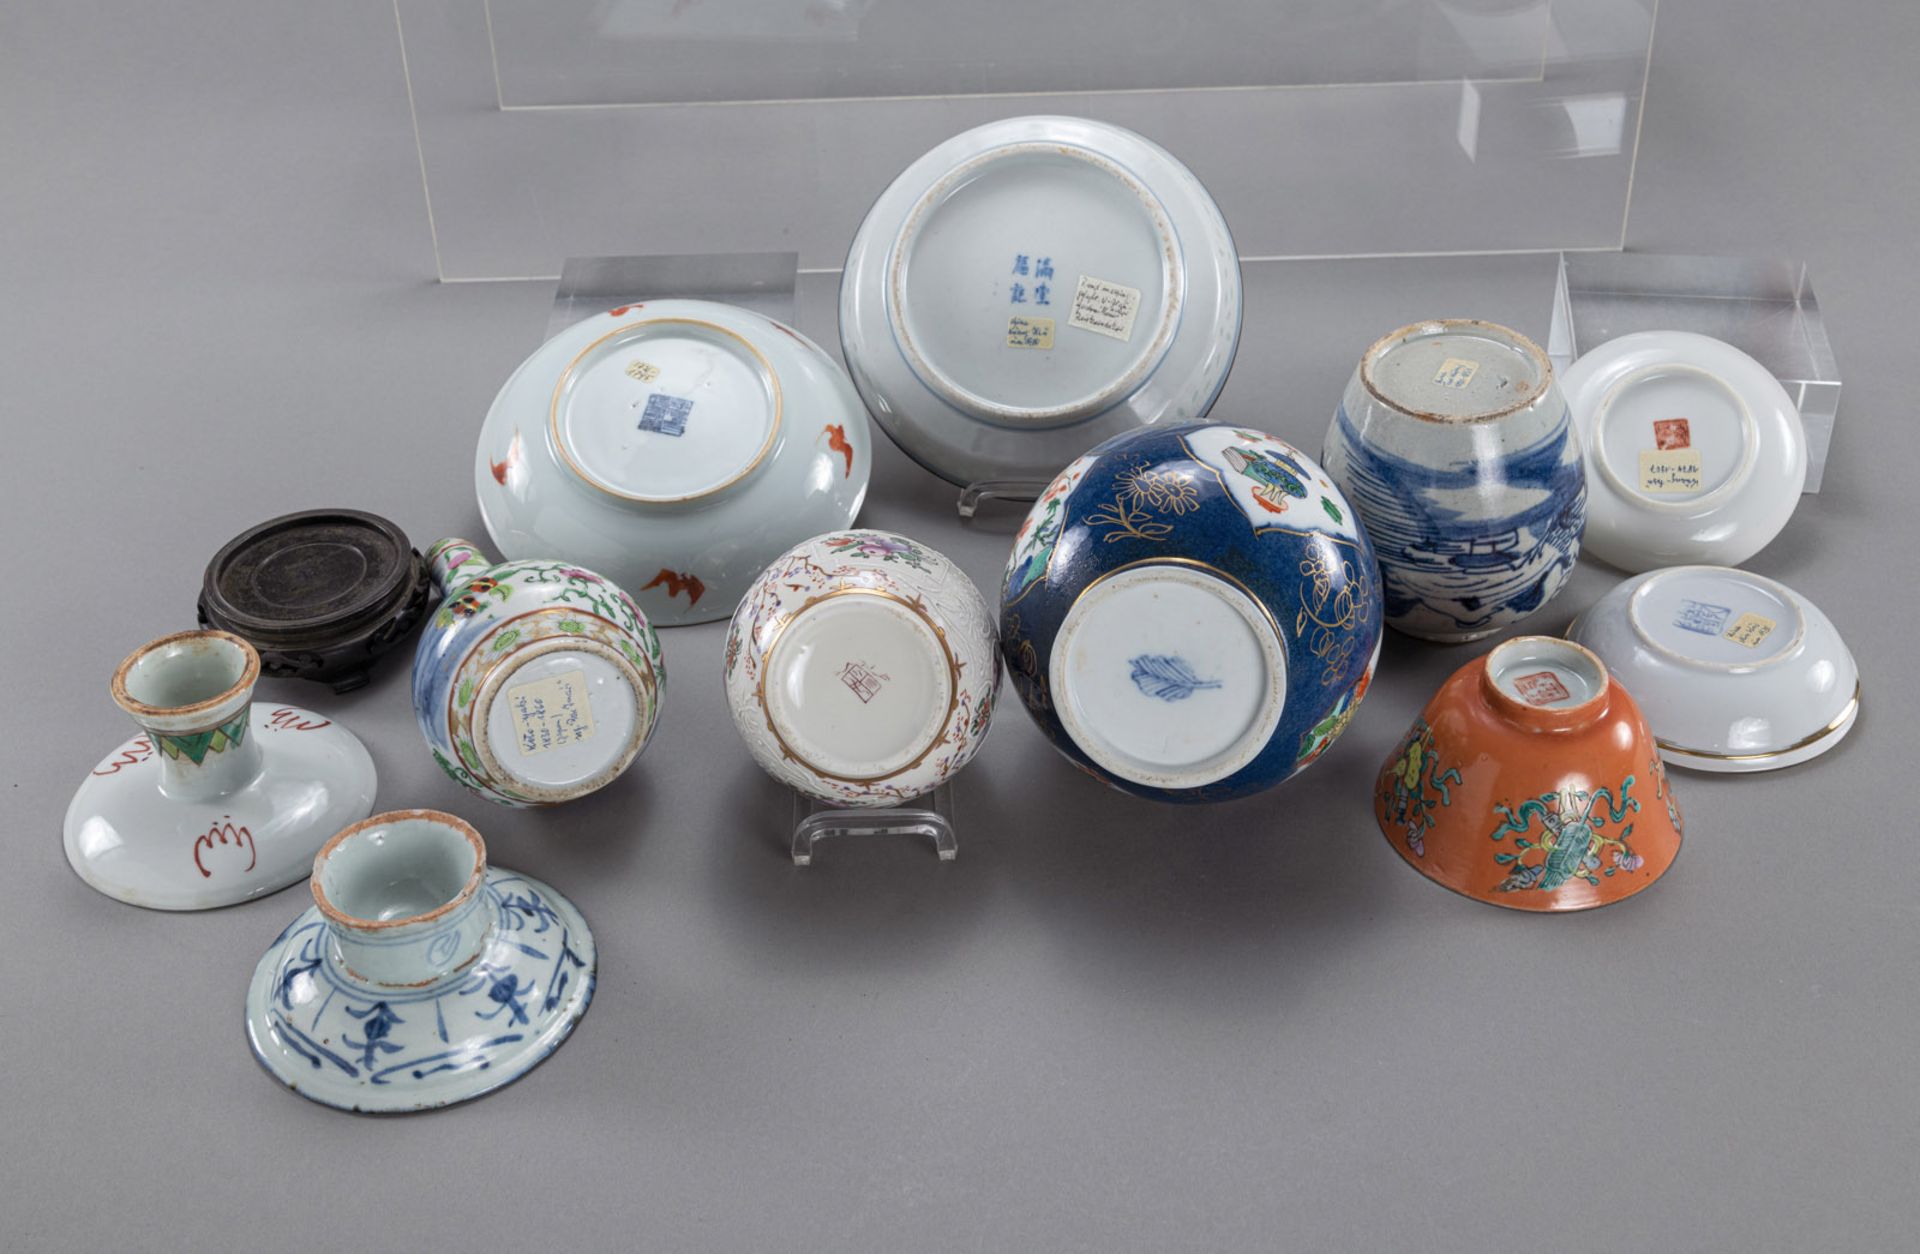 A GROUP OF POLYCHROME PORCELAIN VASES, BOWLS, AND DISHES - Image 4 of 4